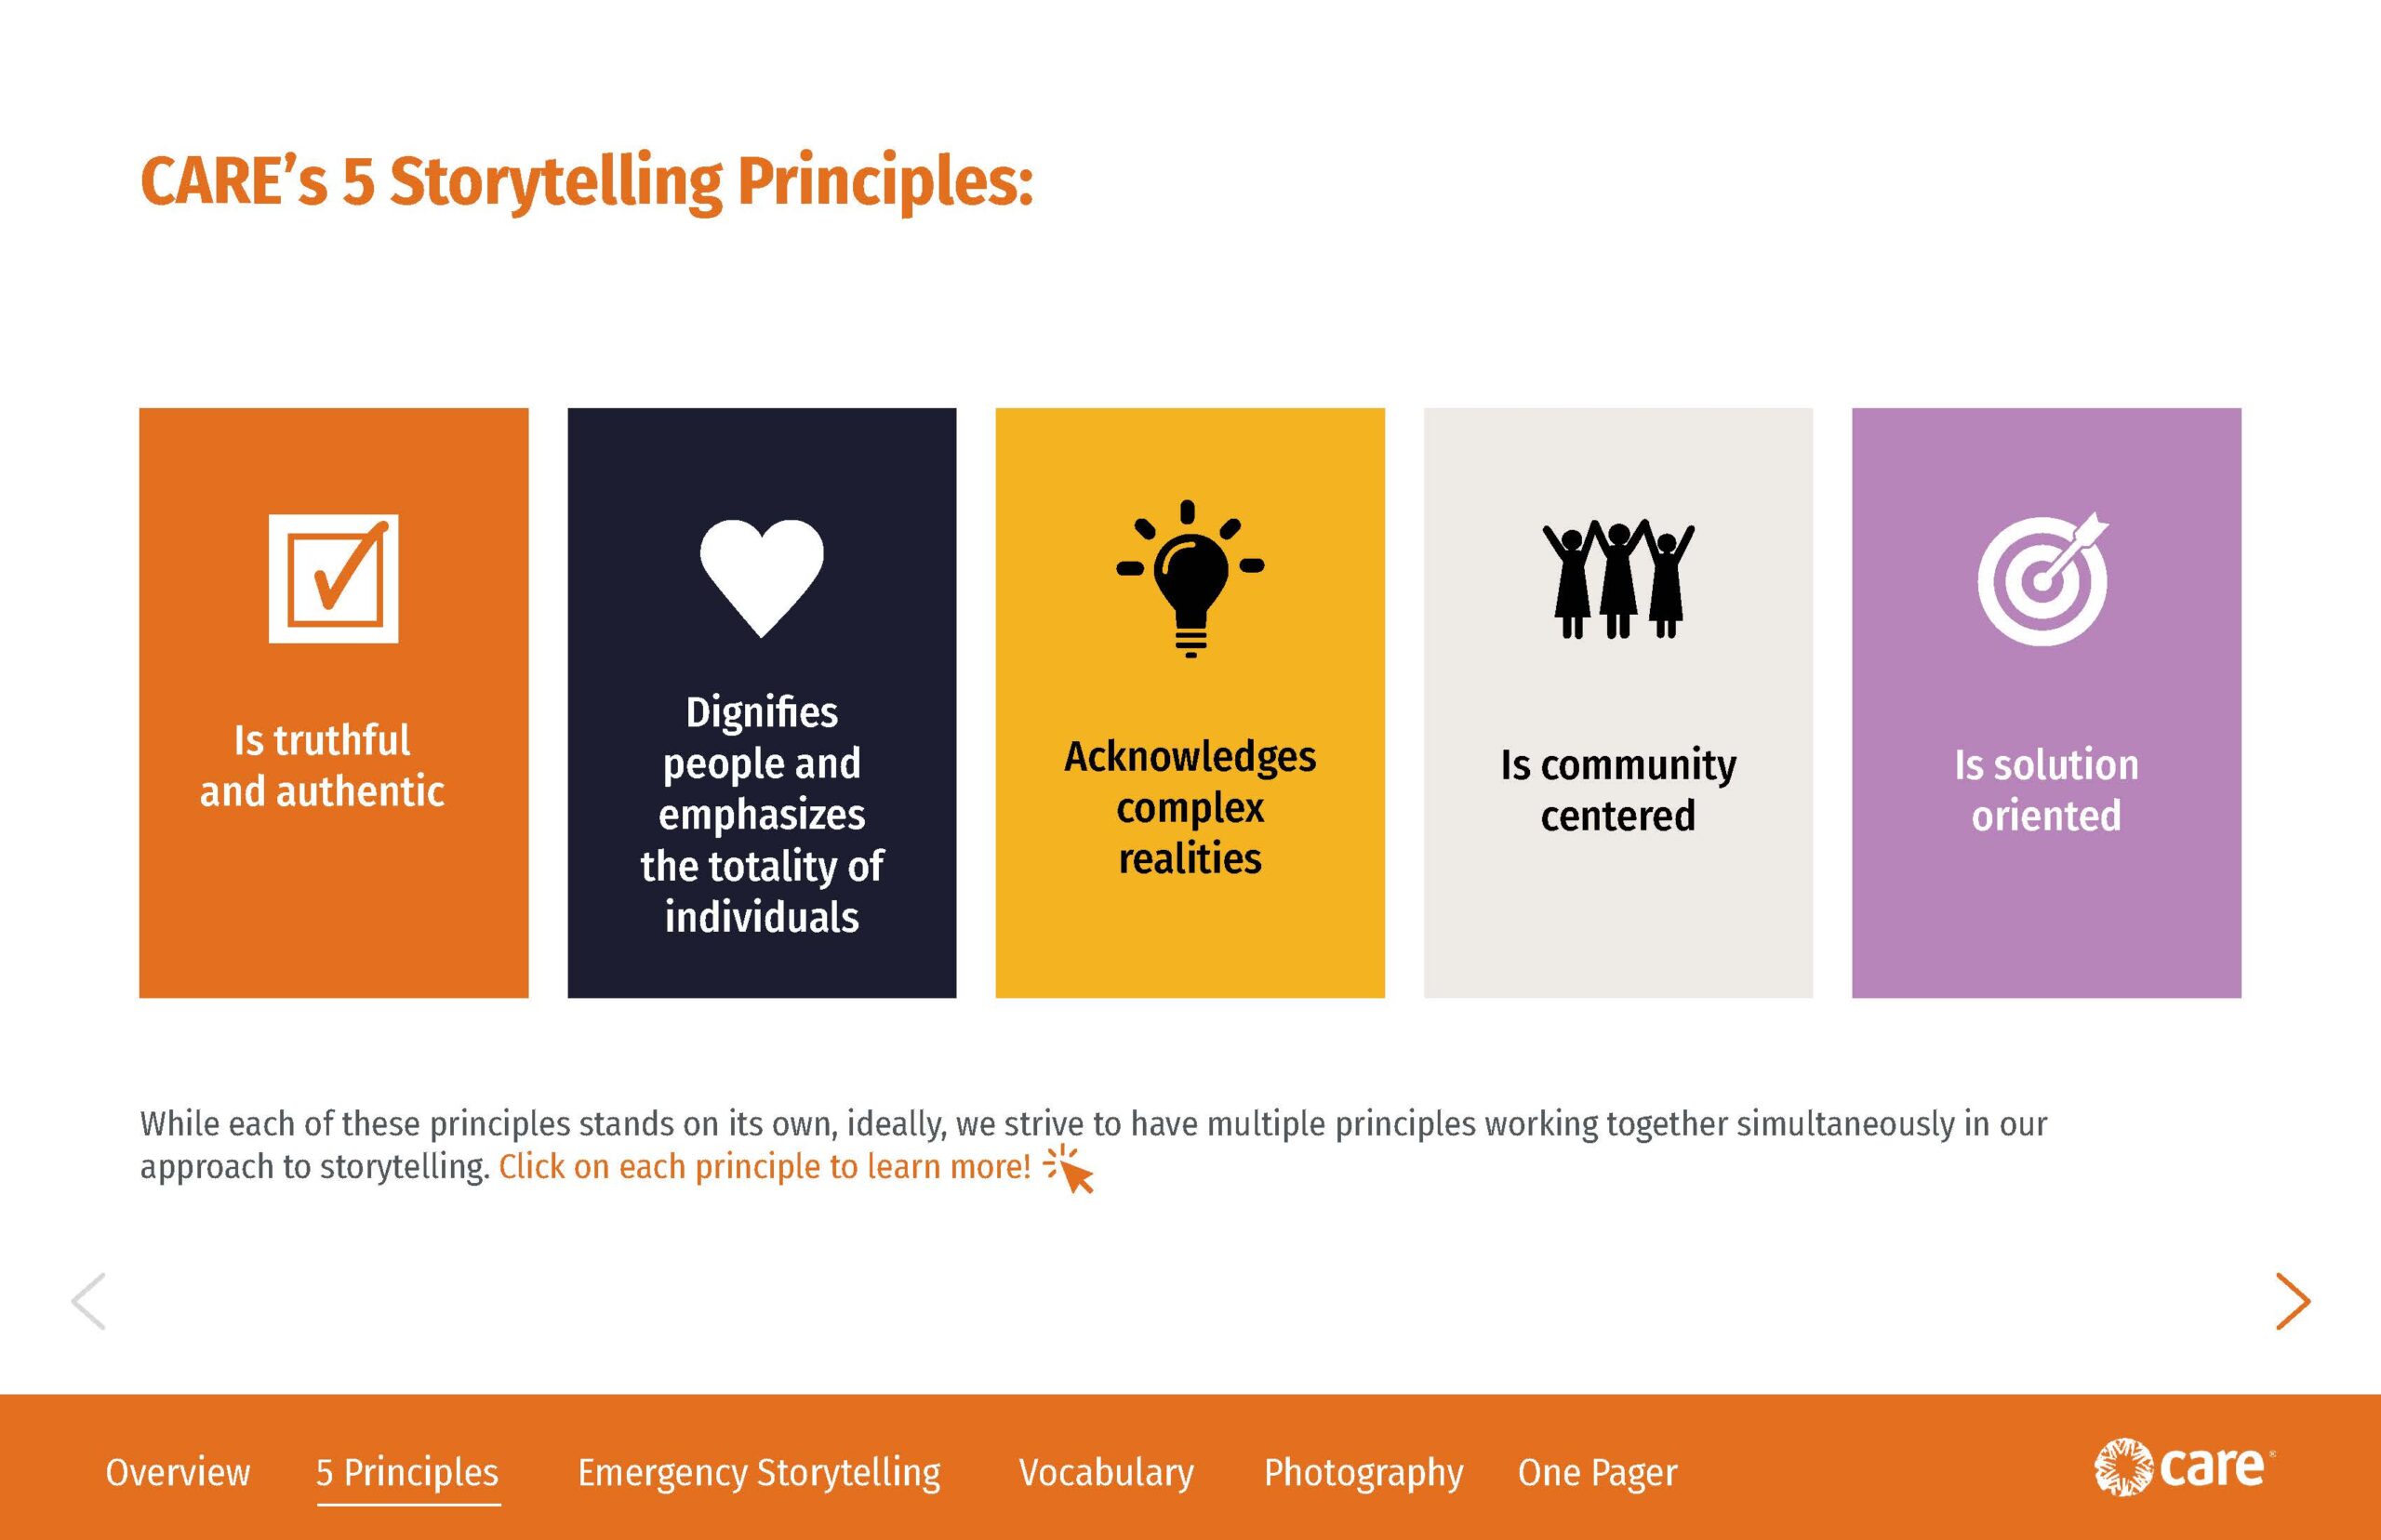 Screenshot of a slide listing CARE's storytelling principles. According to the handbook, a well-told story is truthful and authentic, dignifies people, acknowledges complex realities, is community-centered, and is solution-oriented.